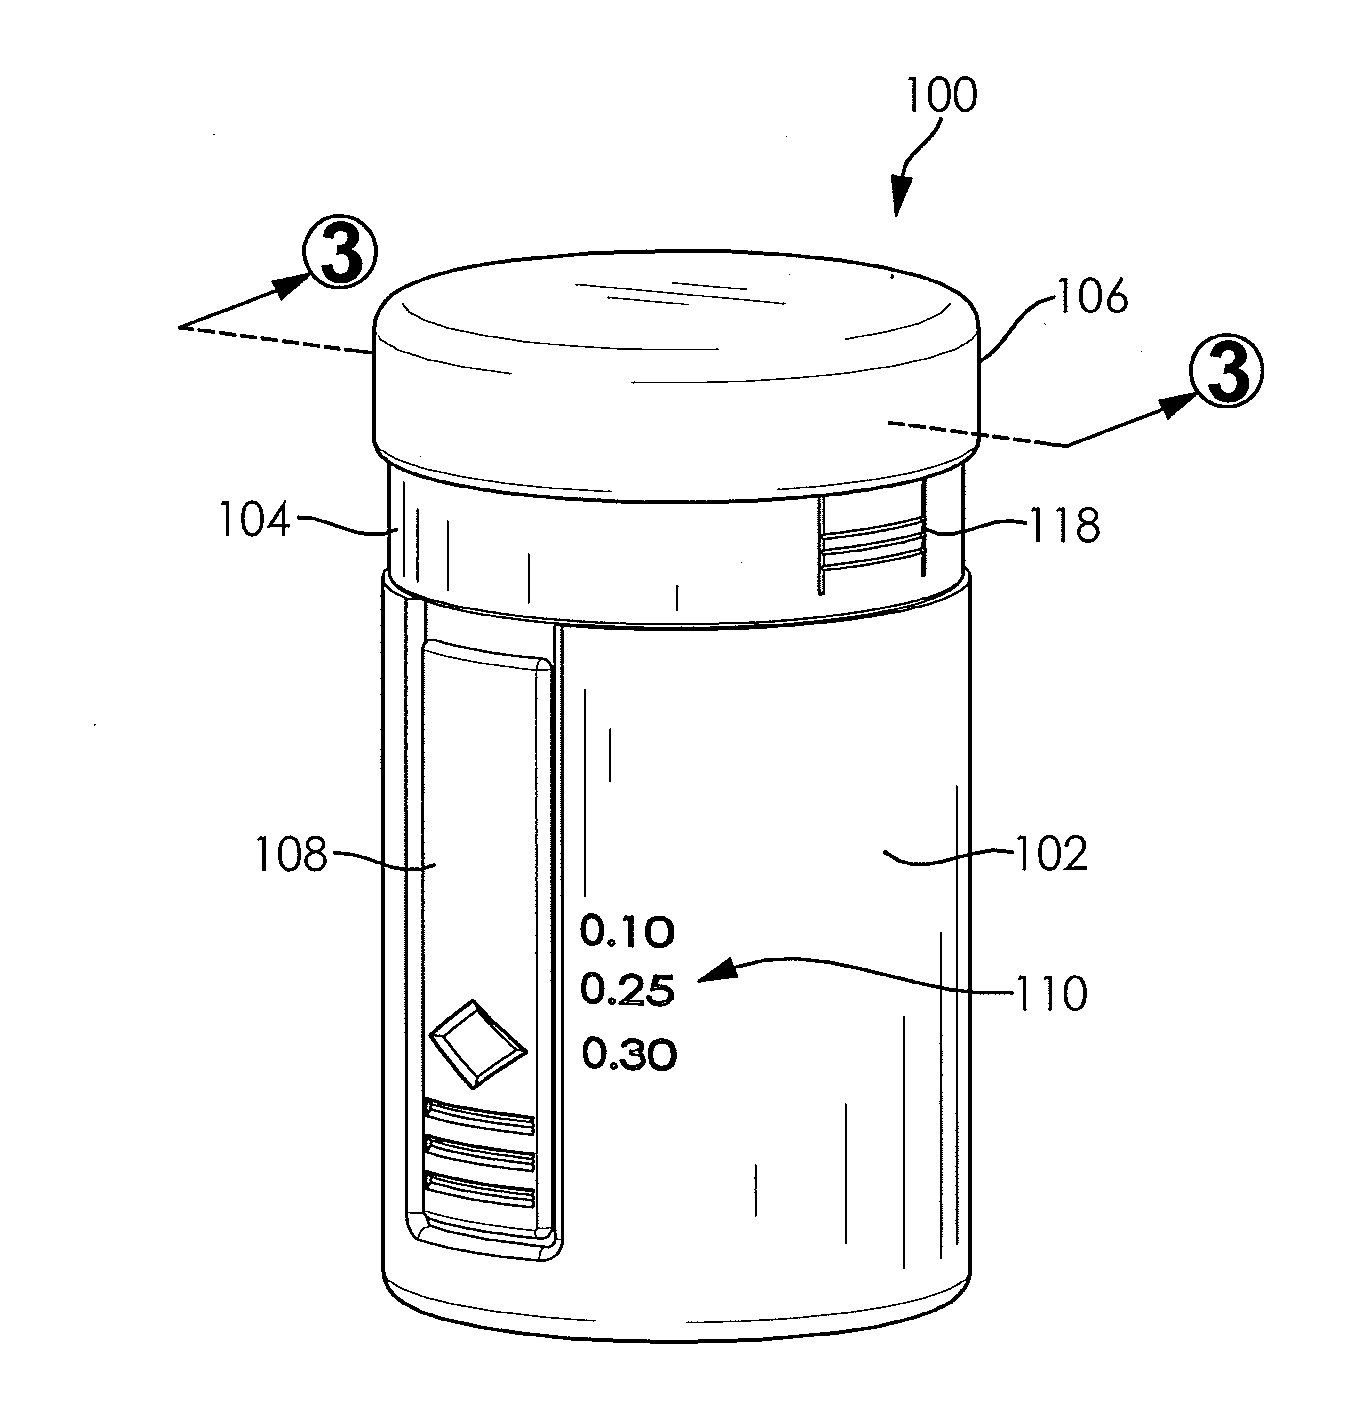 Multi-dose dispenser and applicator for topical medications